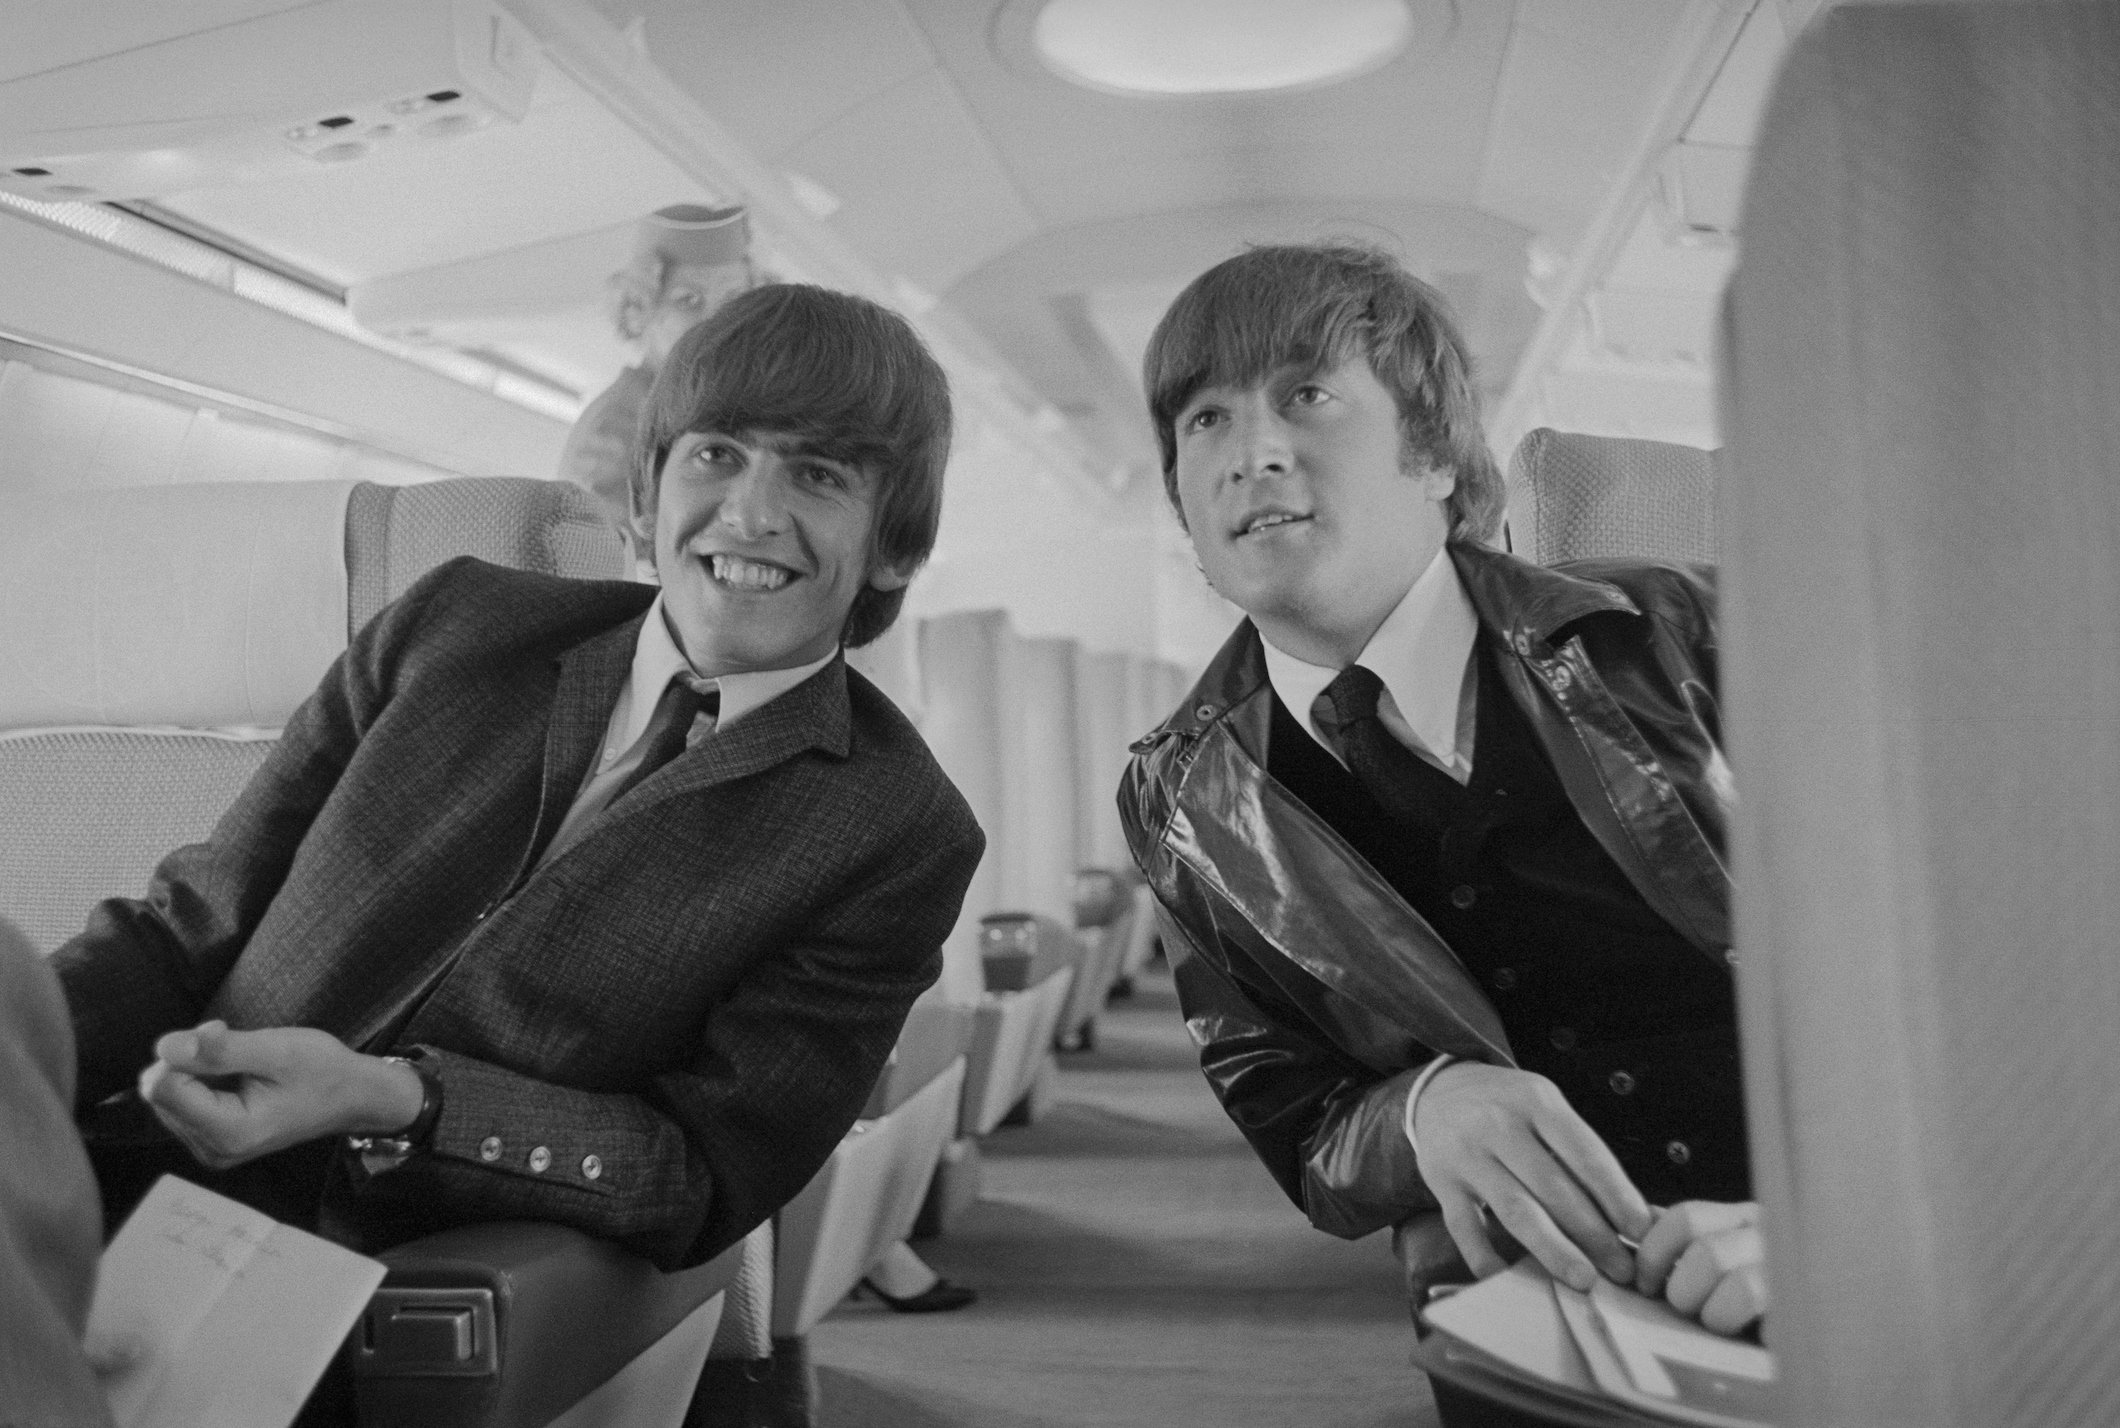 George Harrison and John Lennon of The Beatles on a plane in Los Angeles